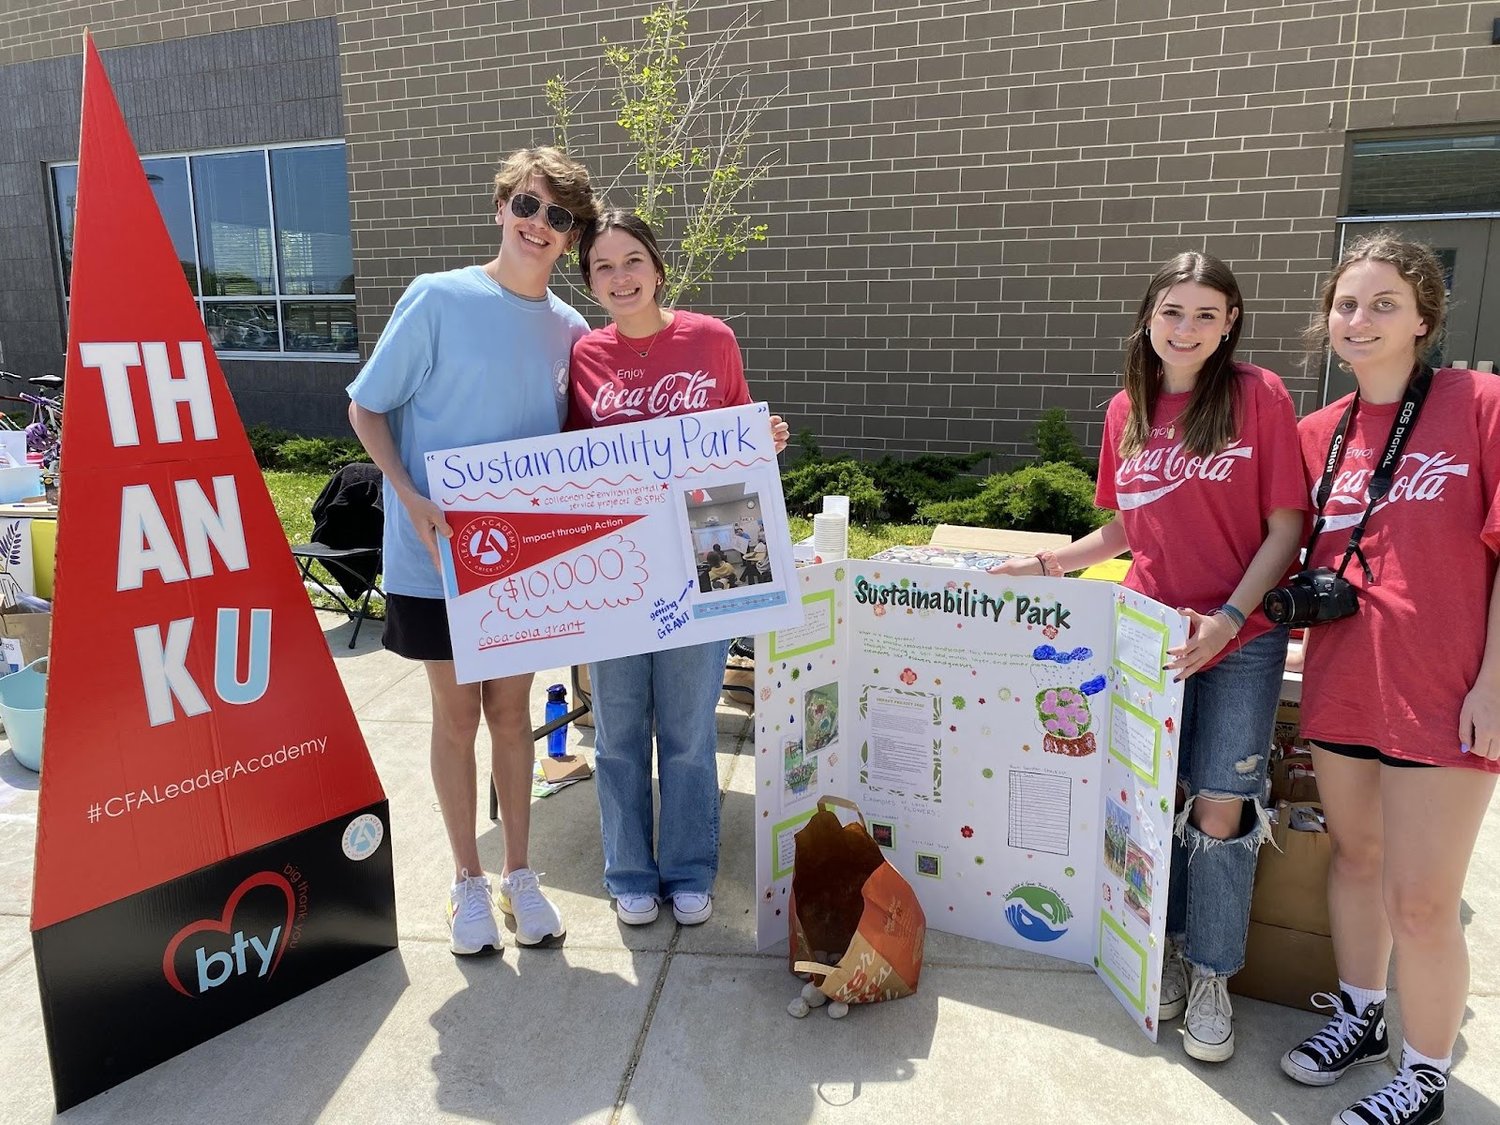 Aidan Darling, Amanda von Diezelski, Isabella Barr and Kate O’Callaghan educated Earth Day Festival attendees about sustainability on April 30 at Severna Park High School.